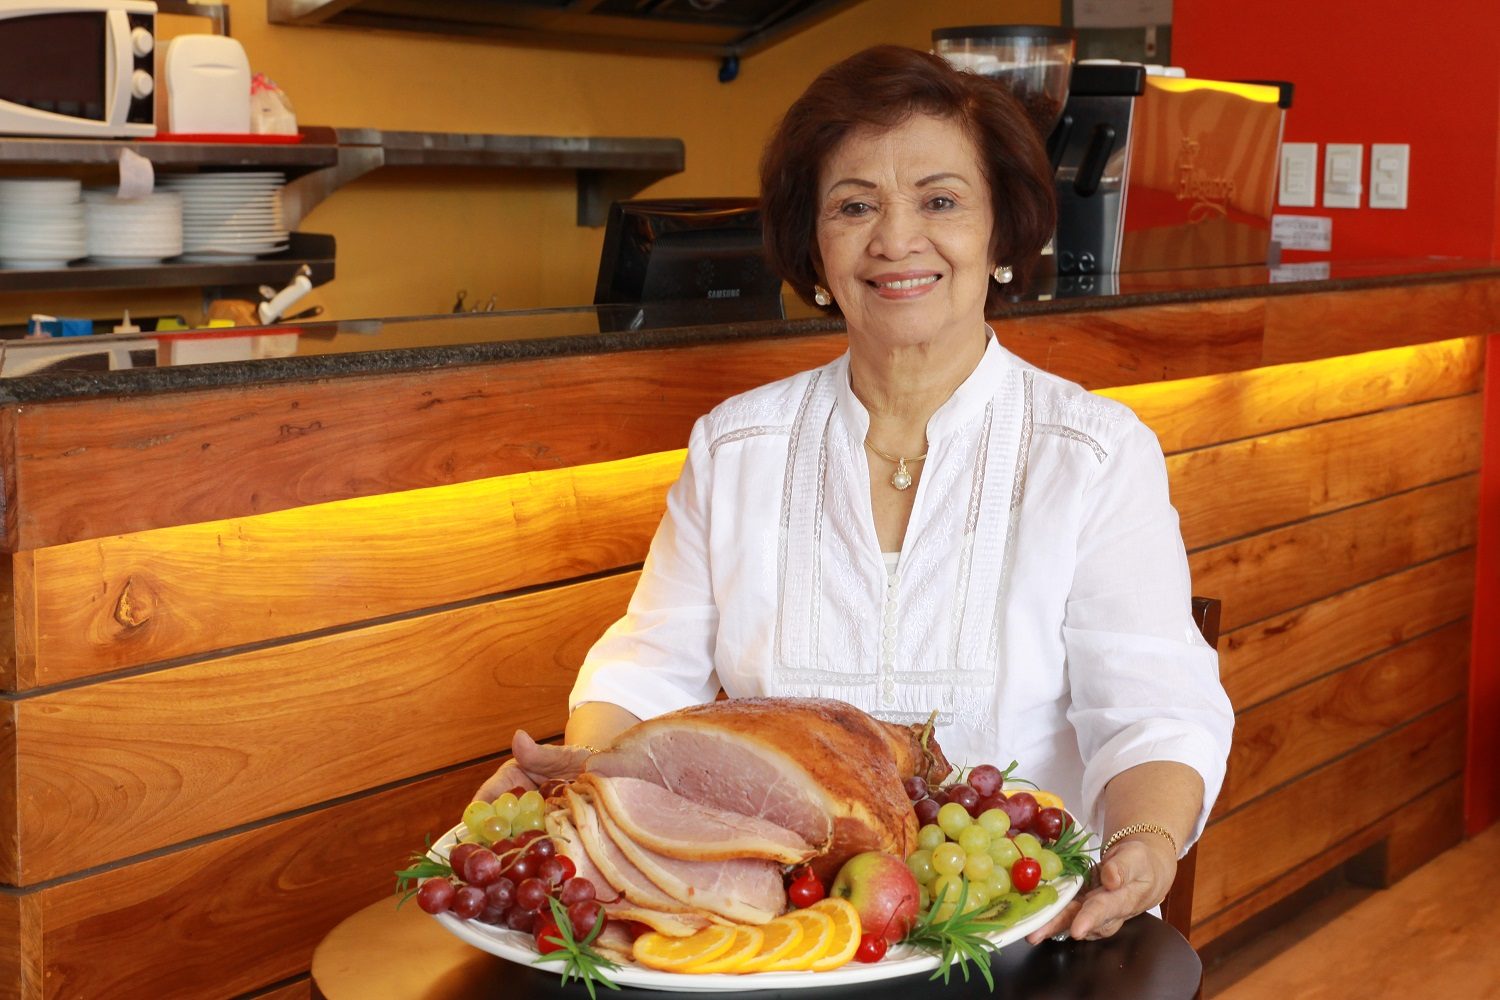 The enduring family tradition of Cagayan de Oro’s famous smoked hams